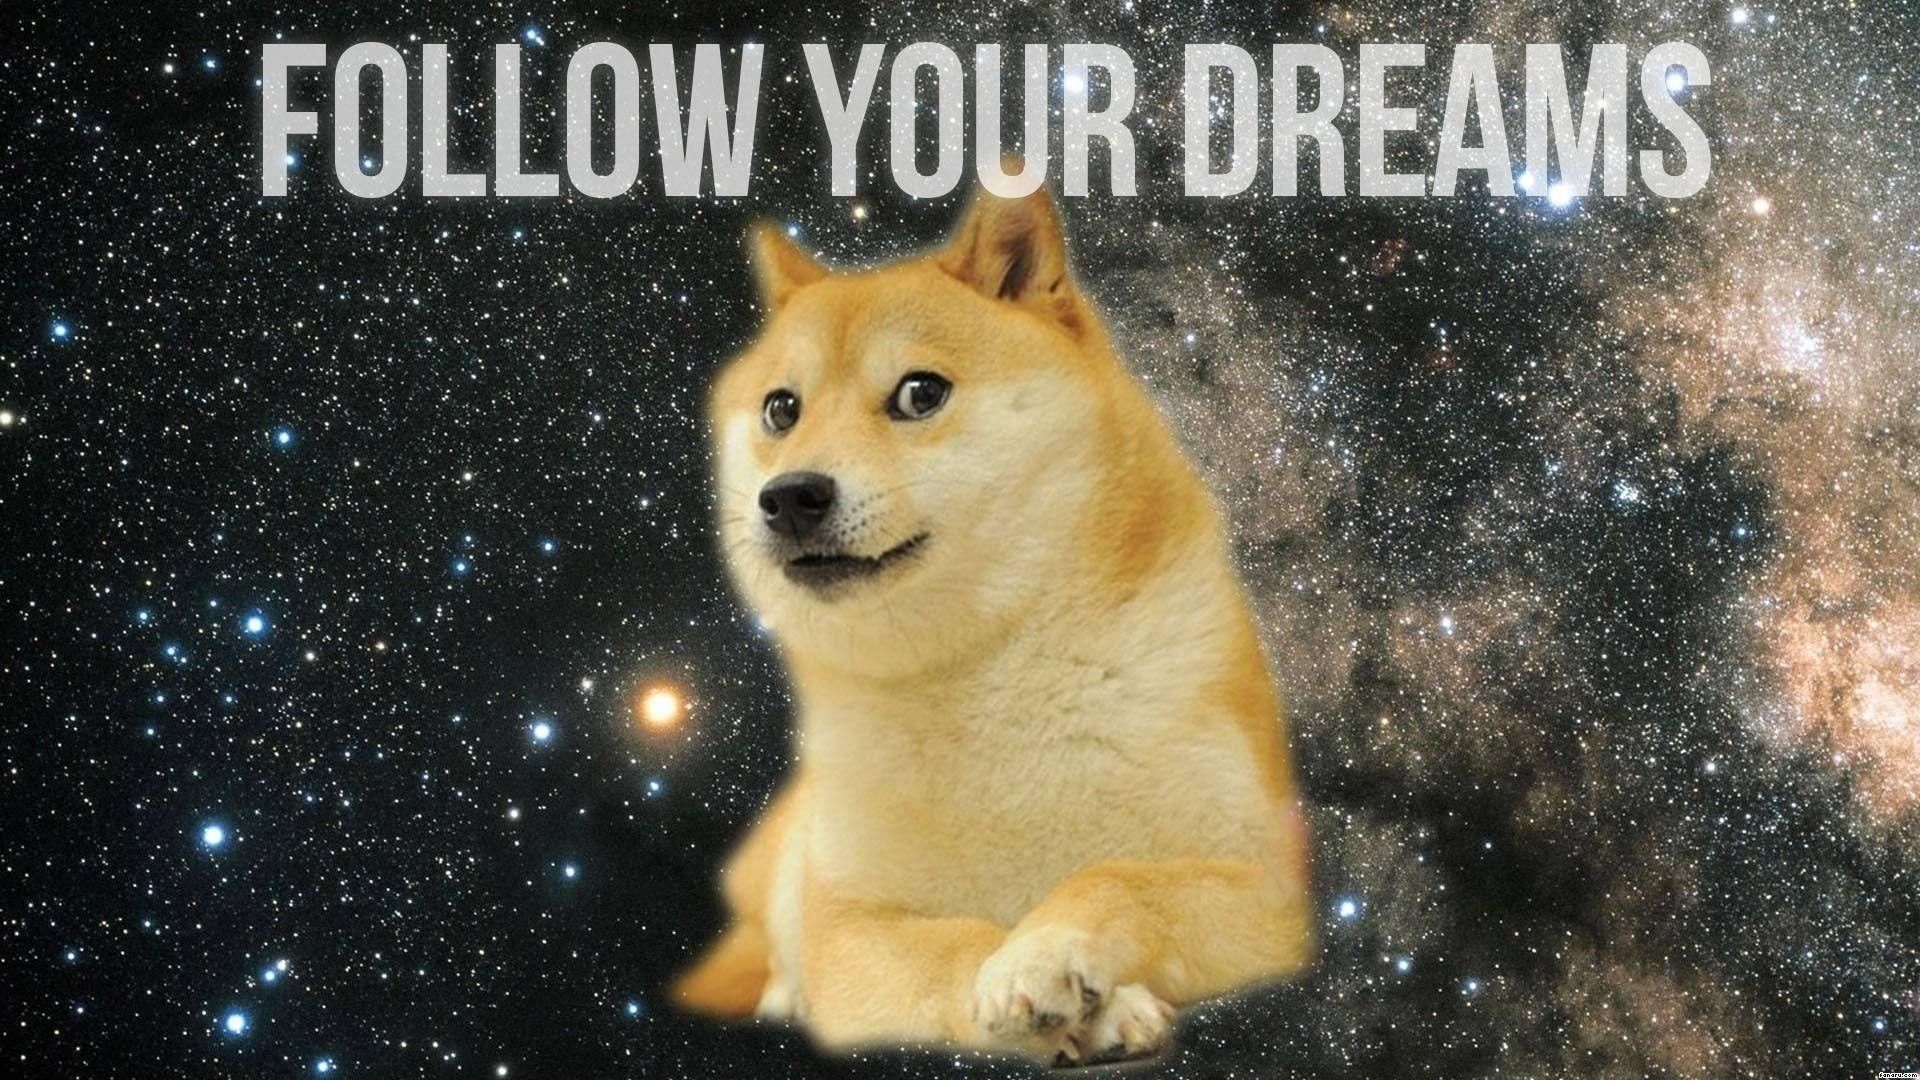 I made a wallpaper for all the dogebois out there Feel free to use it  2560x1440 TO THE MOON  rdogecoin